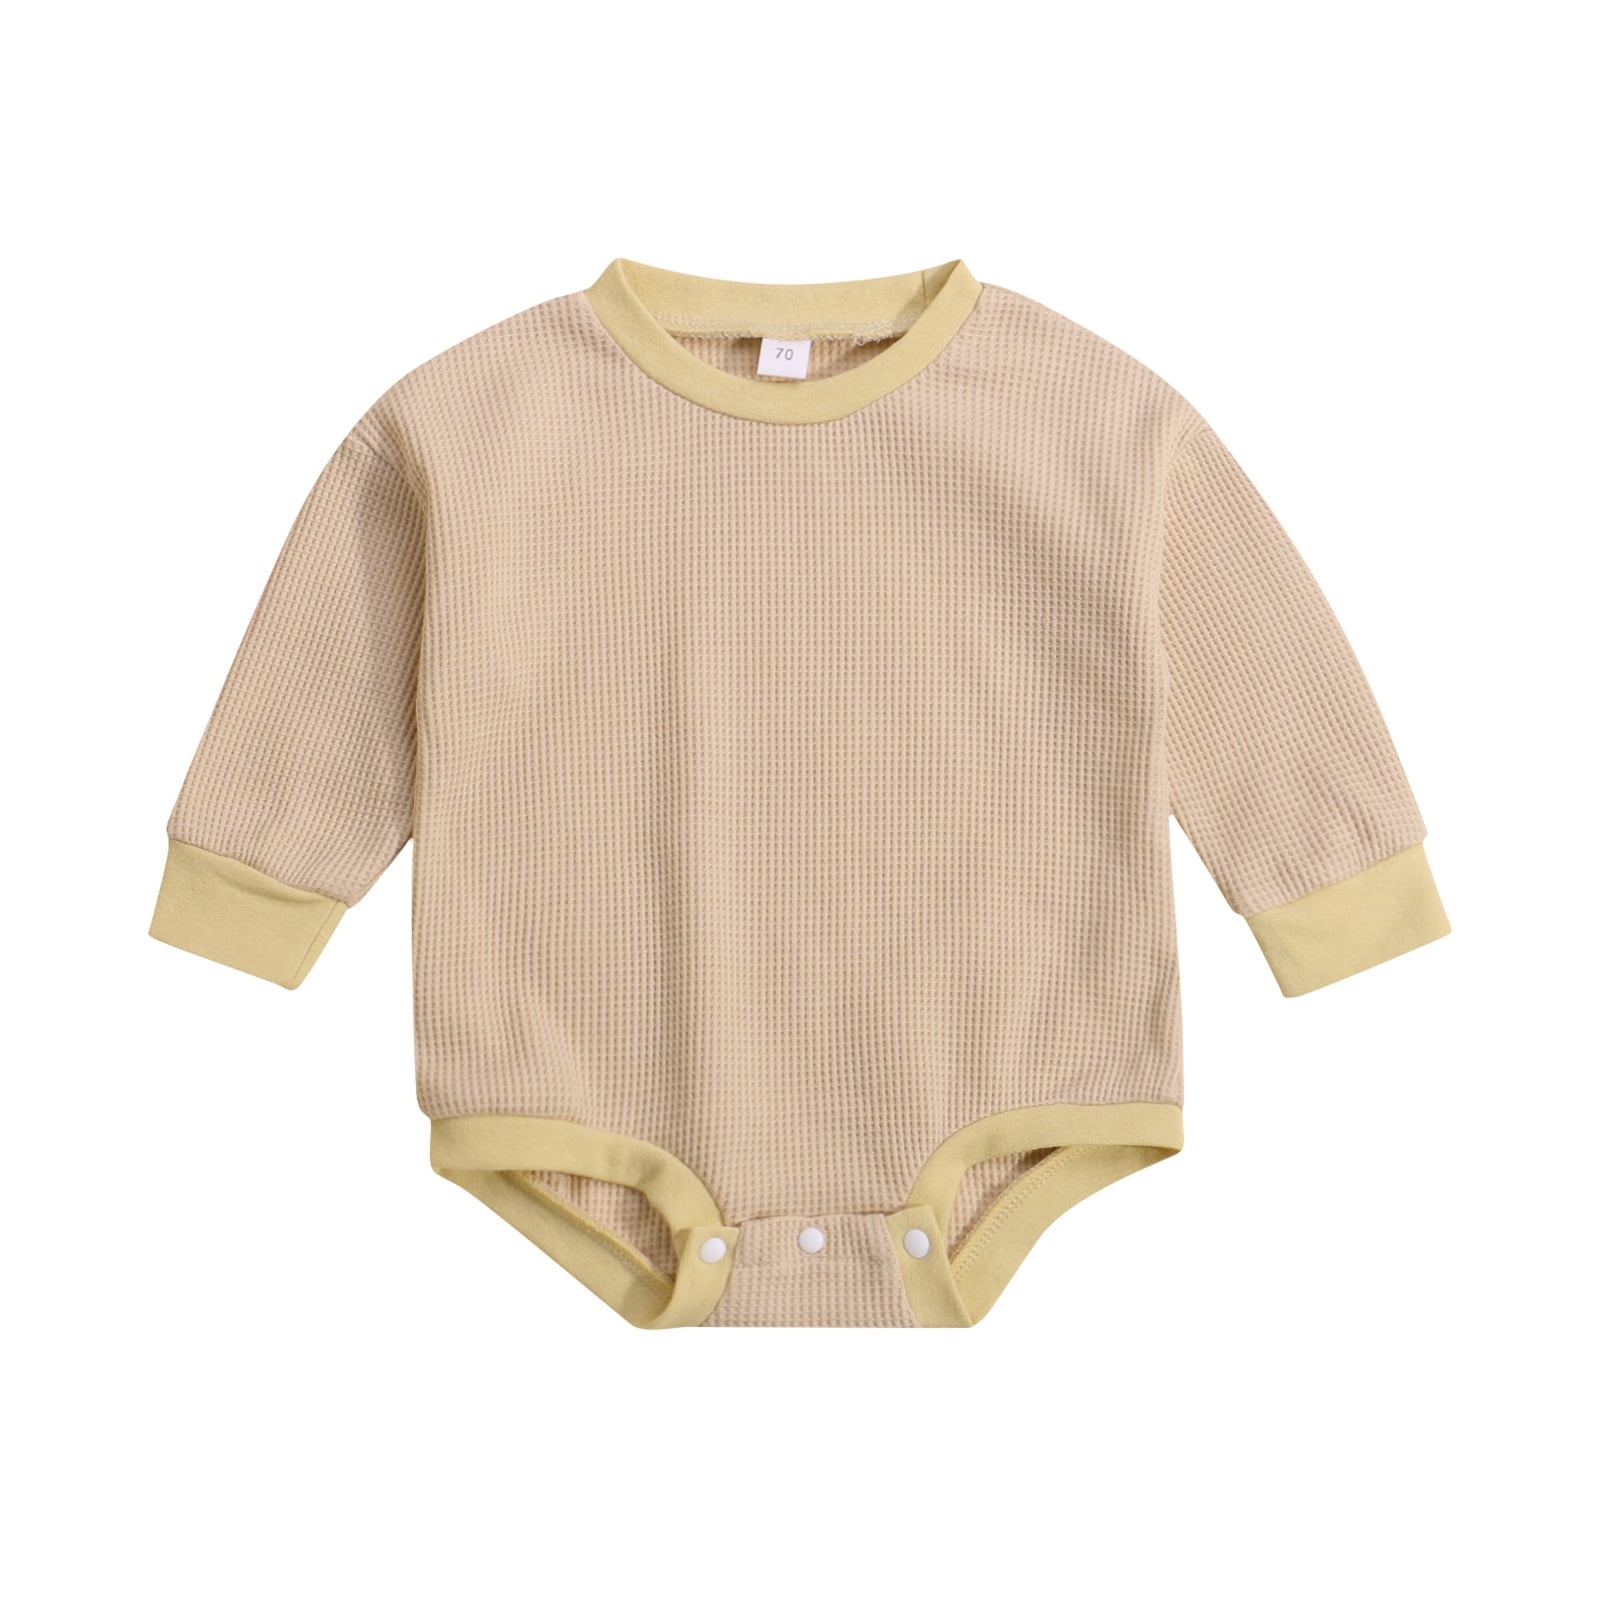 Baby Girl Boy Crewneck Sweatshirt Long Sleeve Romper Oversized Waffle Knit Sweater Bodyusuit Pullover Top Fall Clothes 